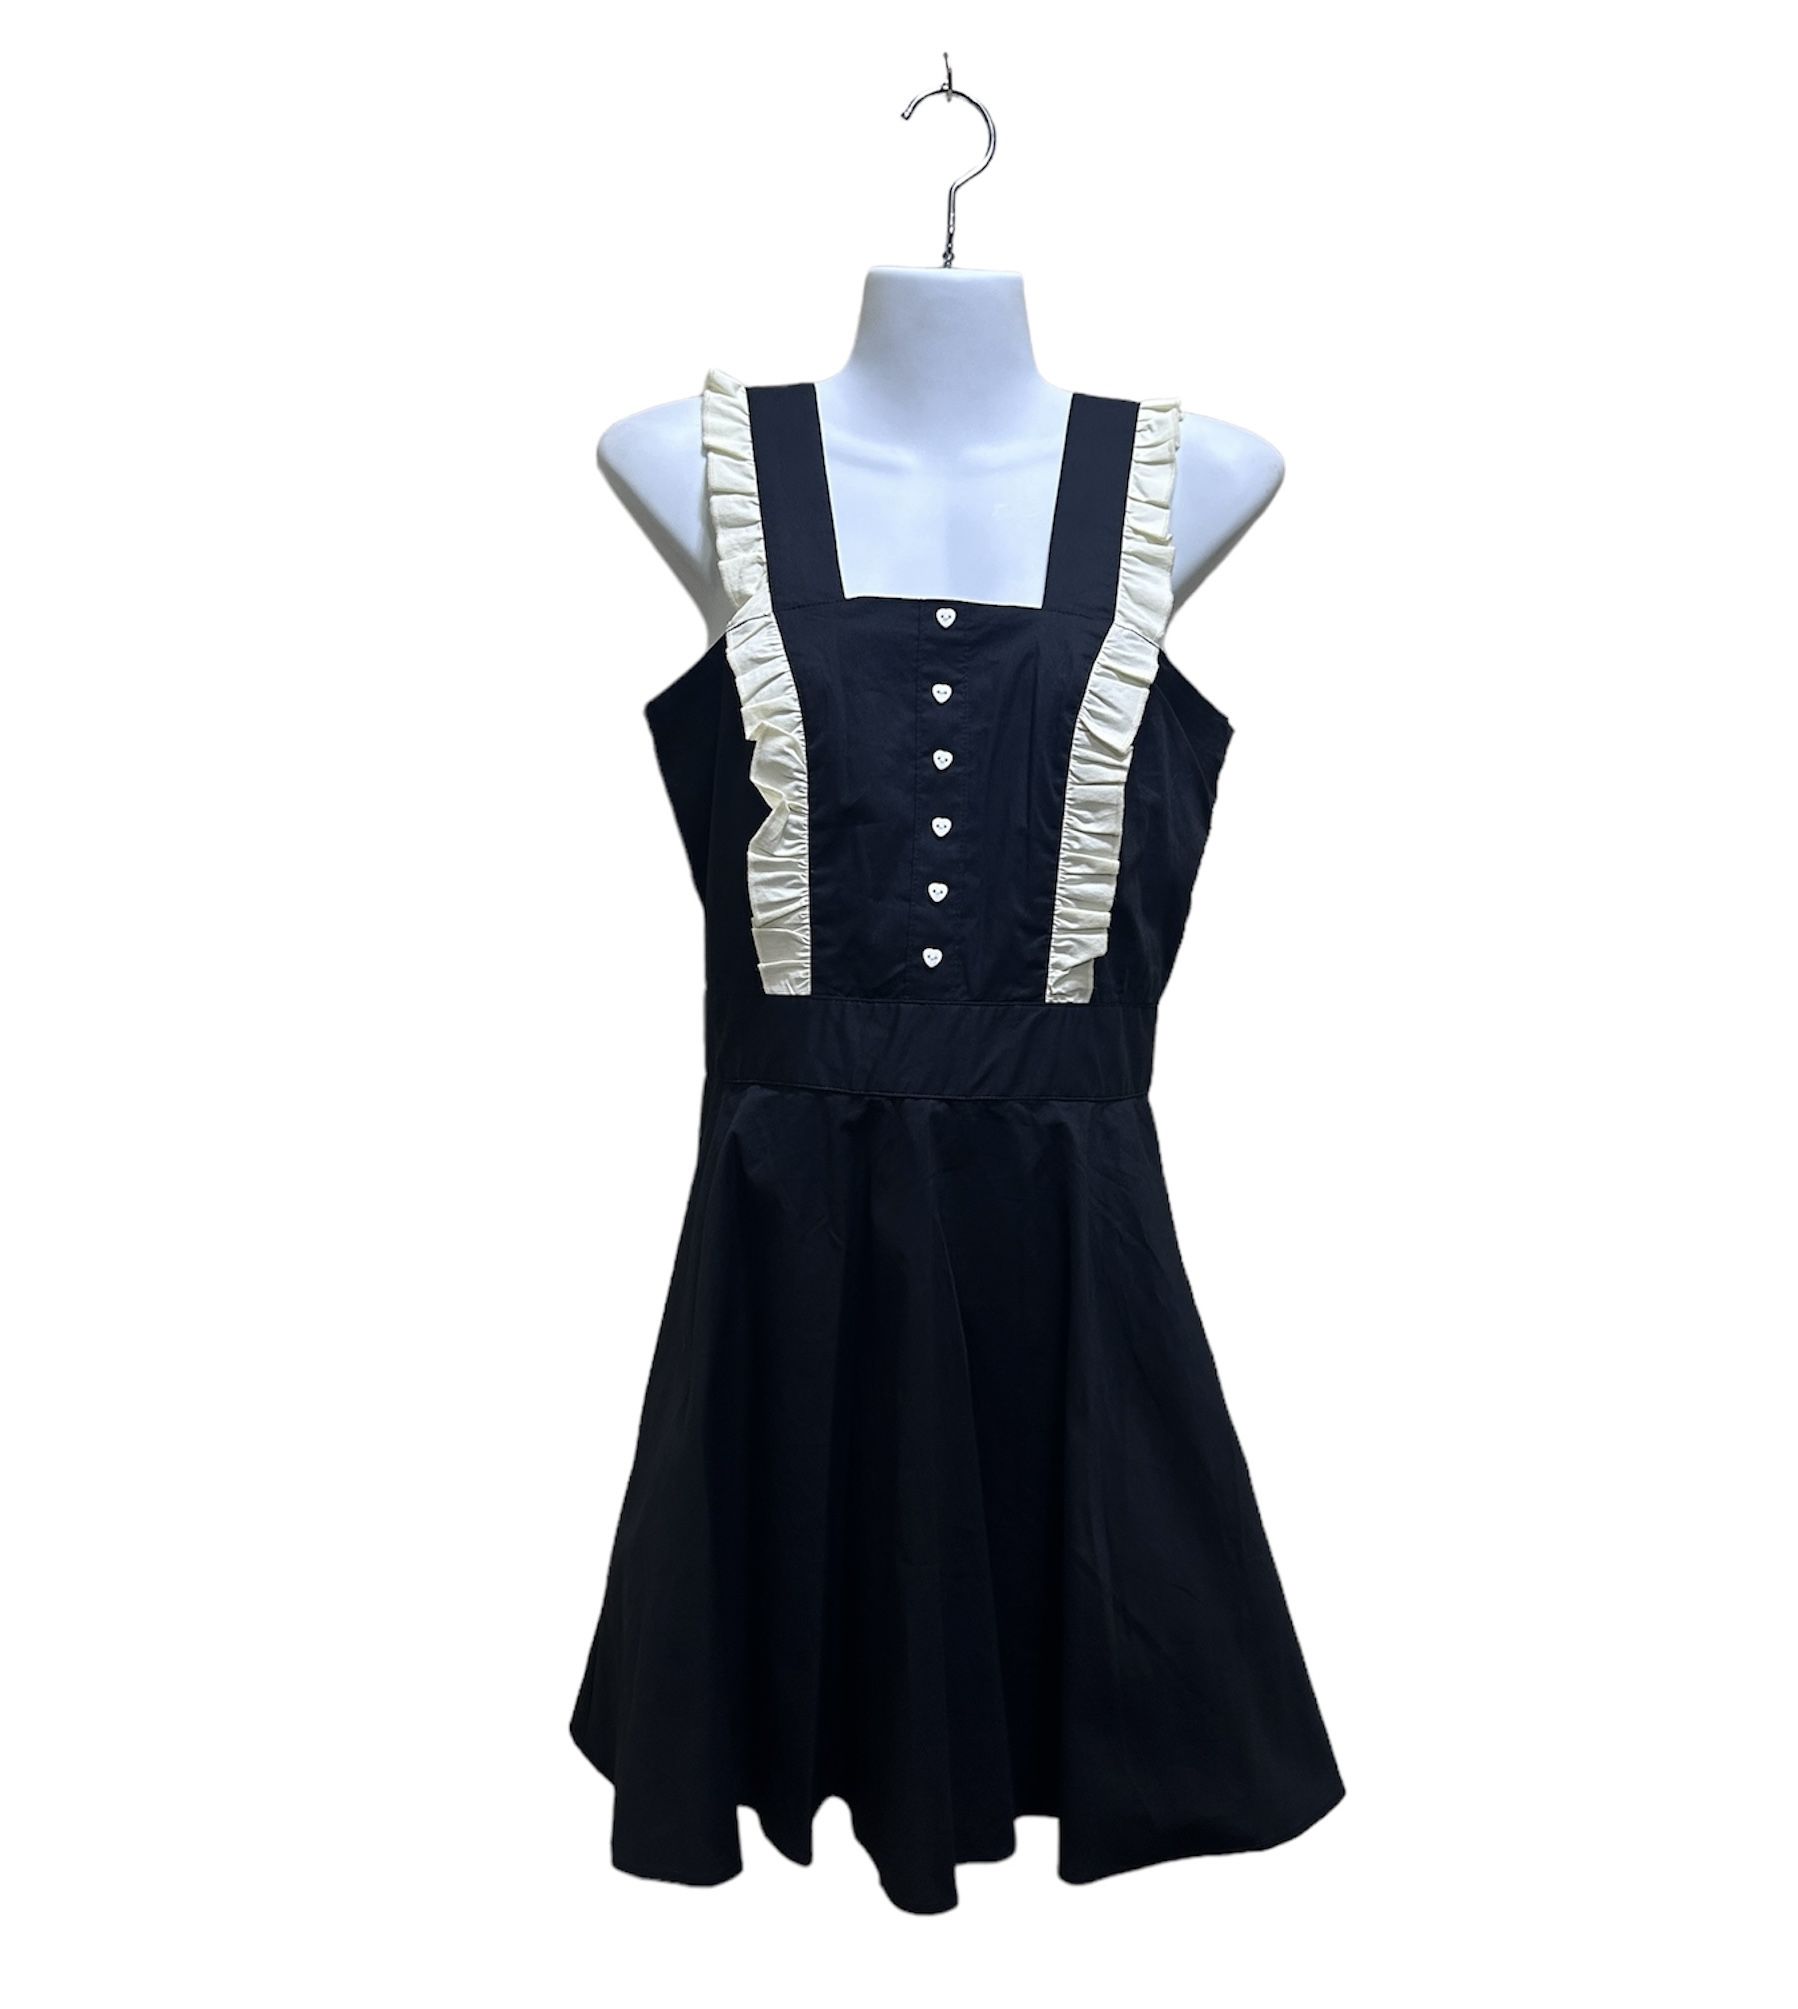 Hot Topic Pinafore Dress S Ruffles Heart Buttons Black Cream Gothic Emo Witchy